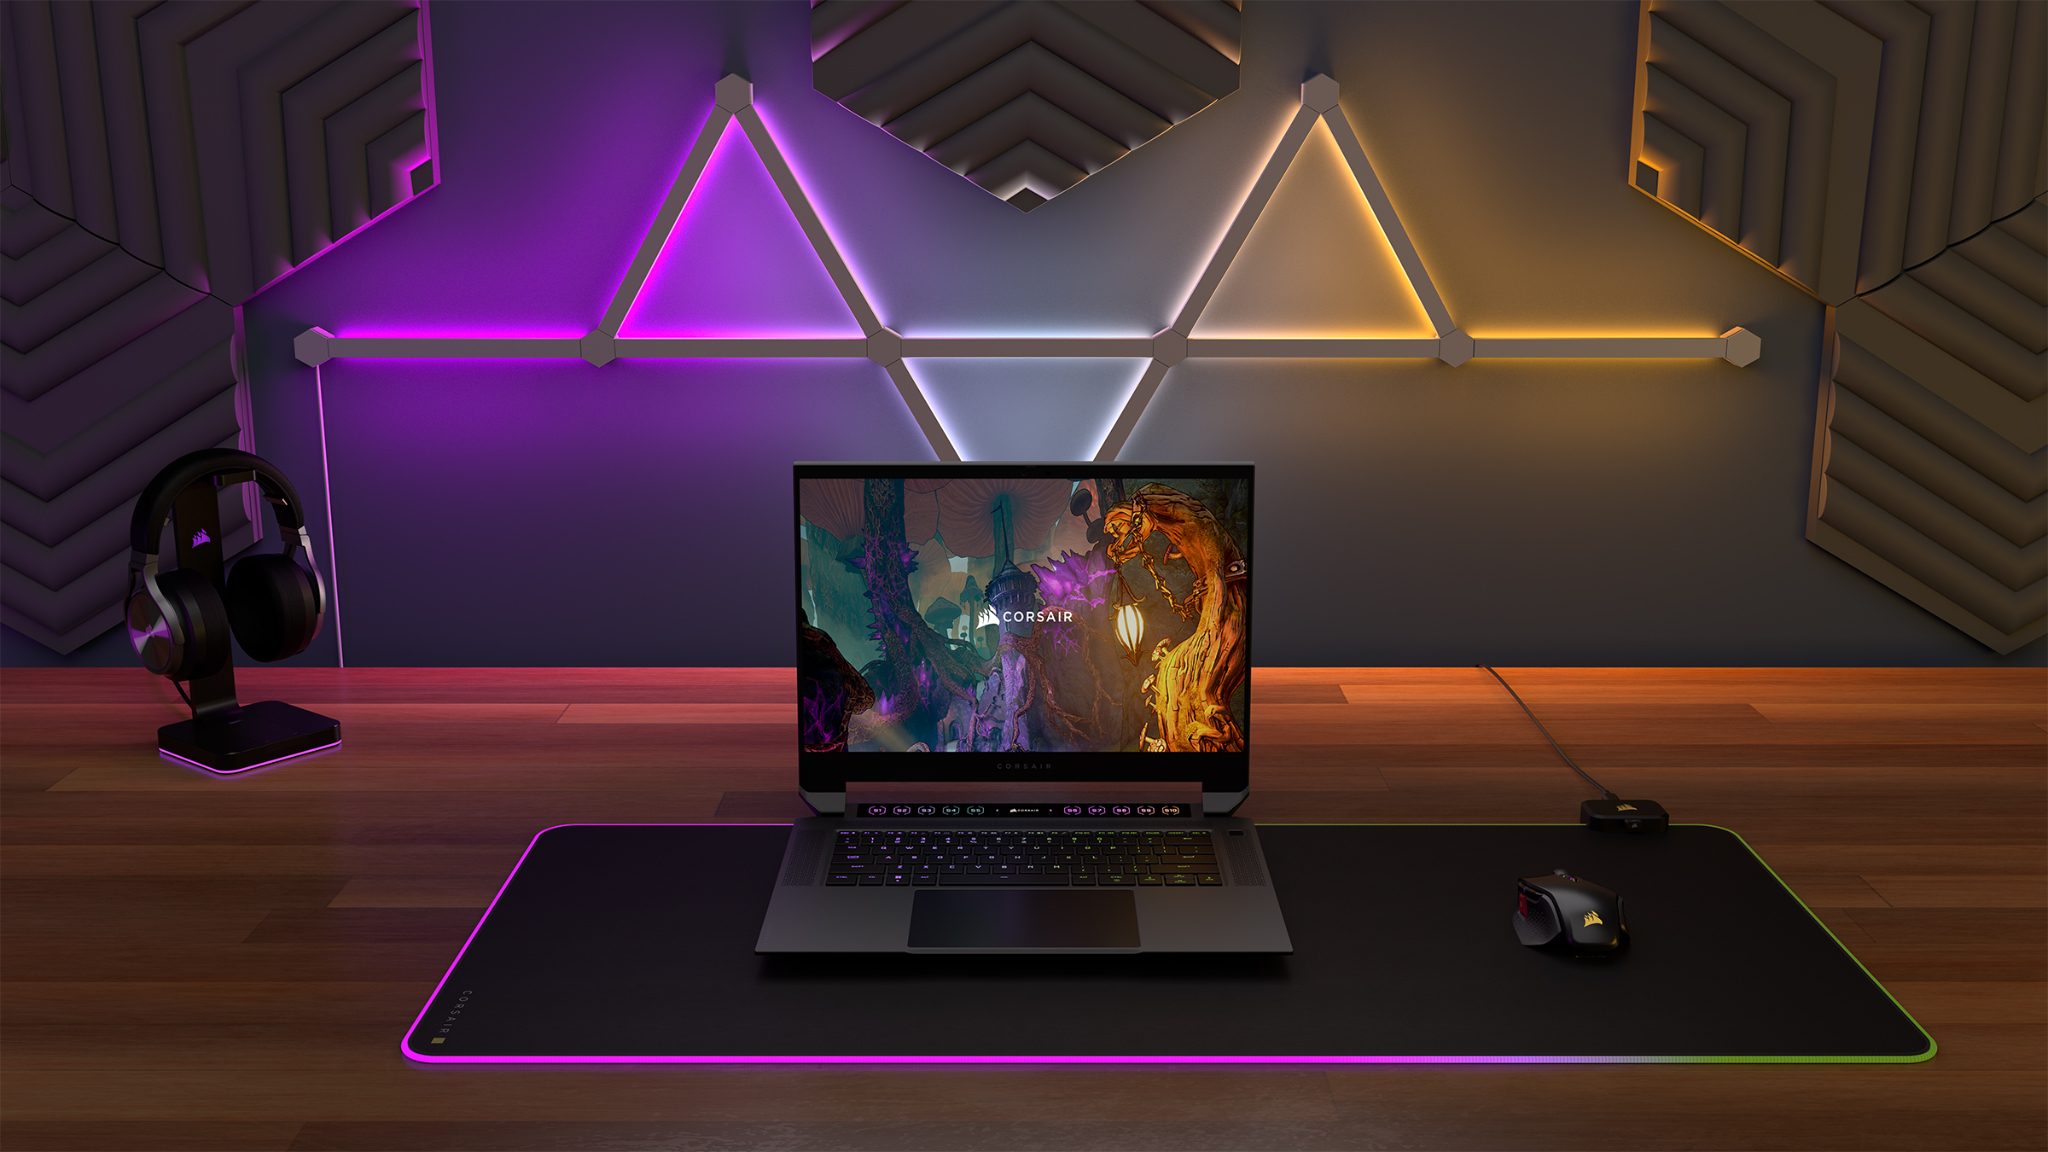 Play in a New Light – CORSAIR Partners with Nanoleaf to Bring Smarter Home to iCUE | Business Wire